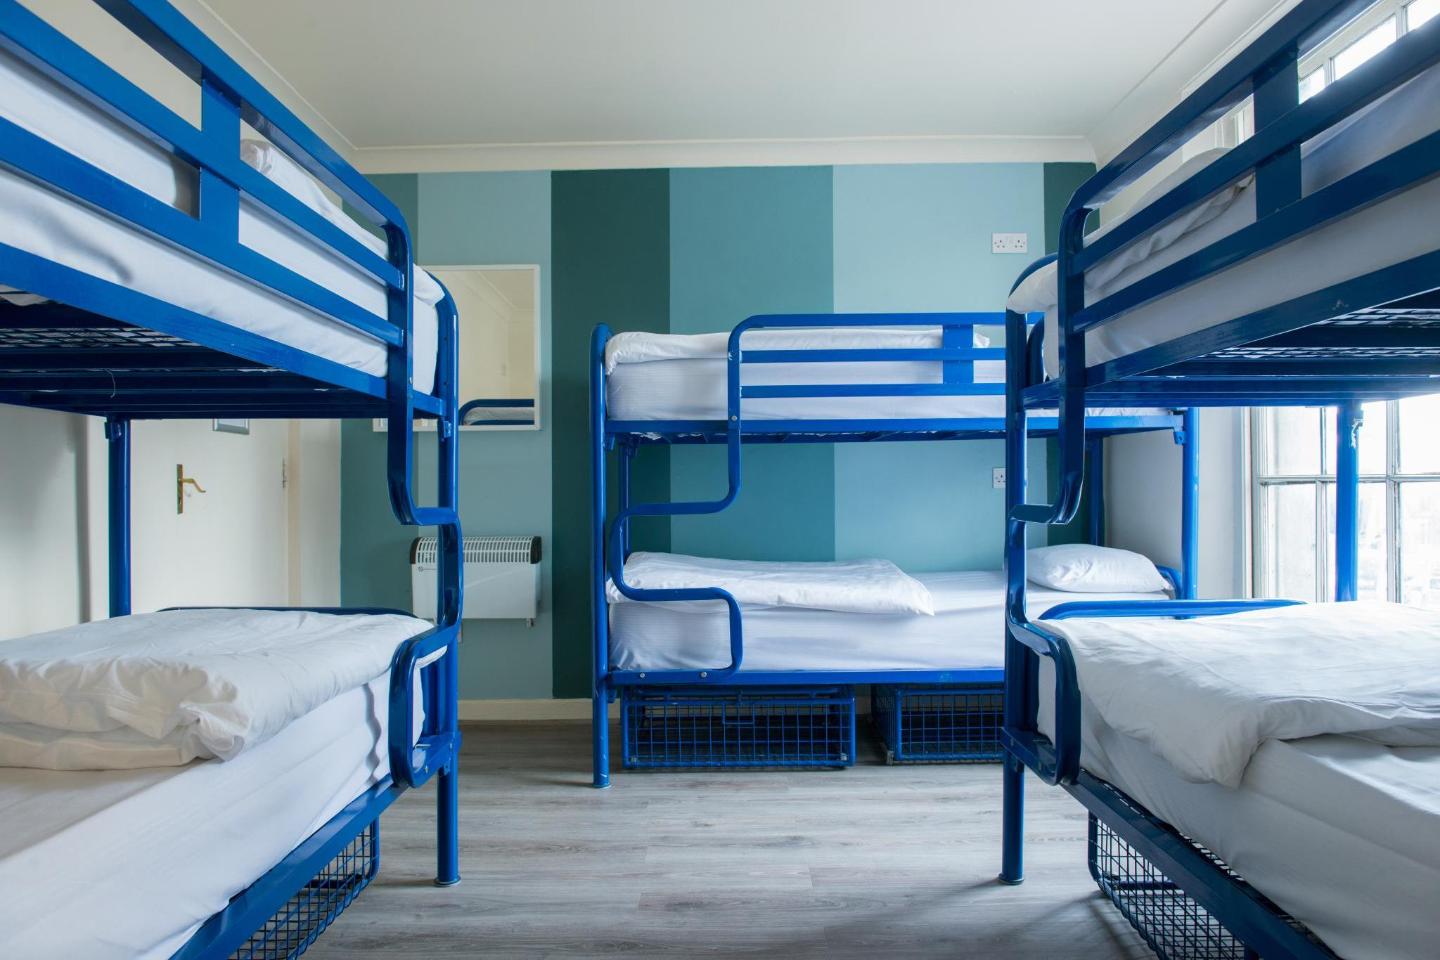 10 Top-Rated Hostels hotels in Dublin